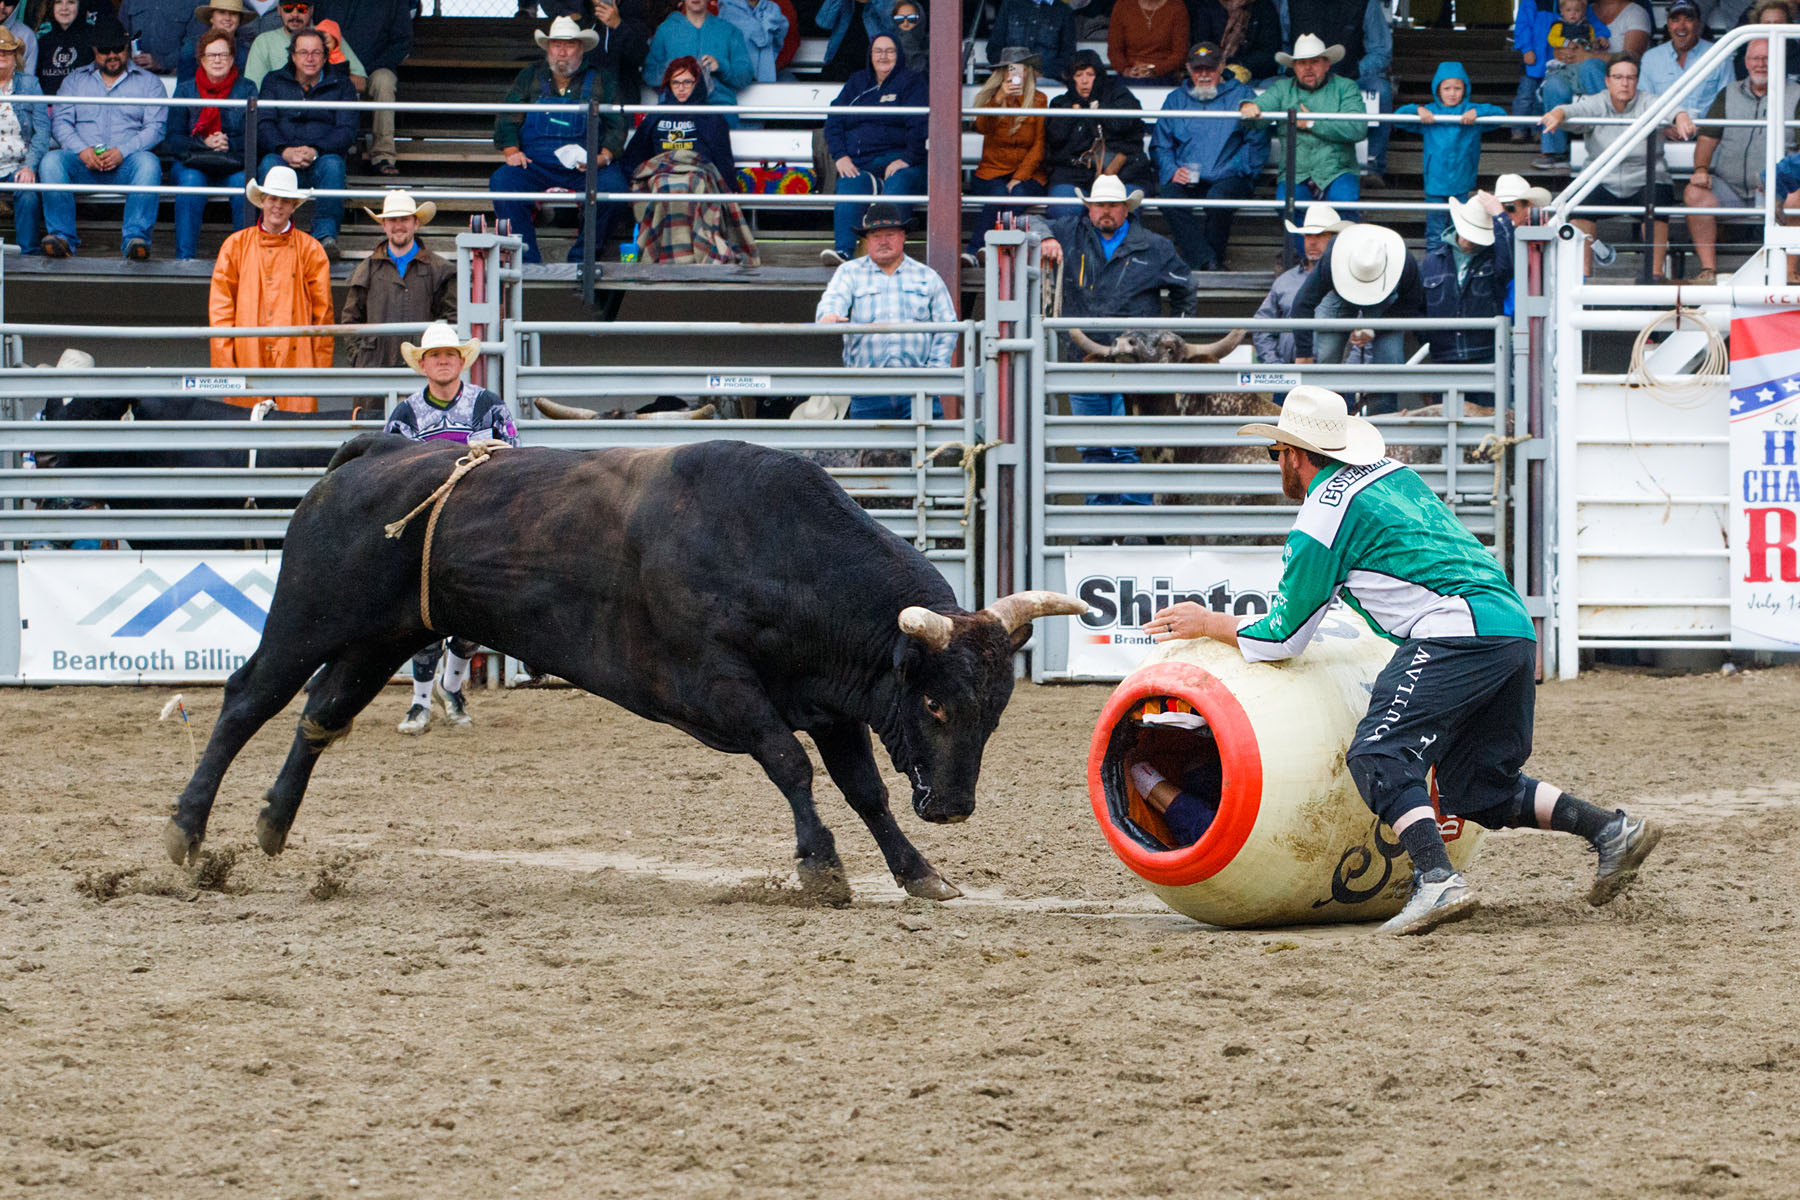 Bullfighter Ezra Coleman taunts the bull, PRCA Xtreme Bulls, Red Lodge, MT.  Click for next photo.